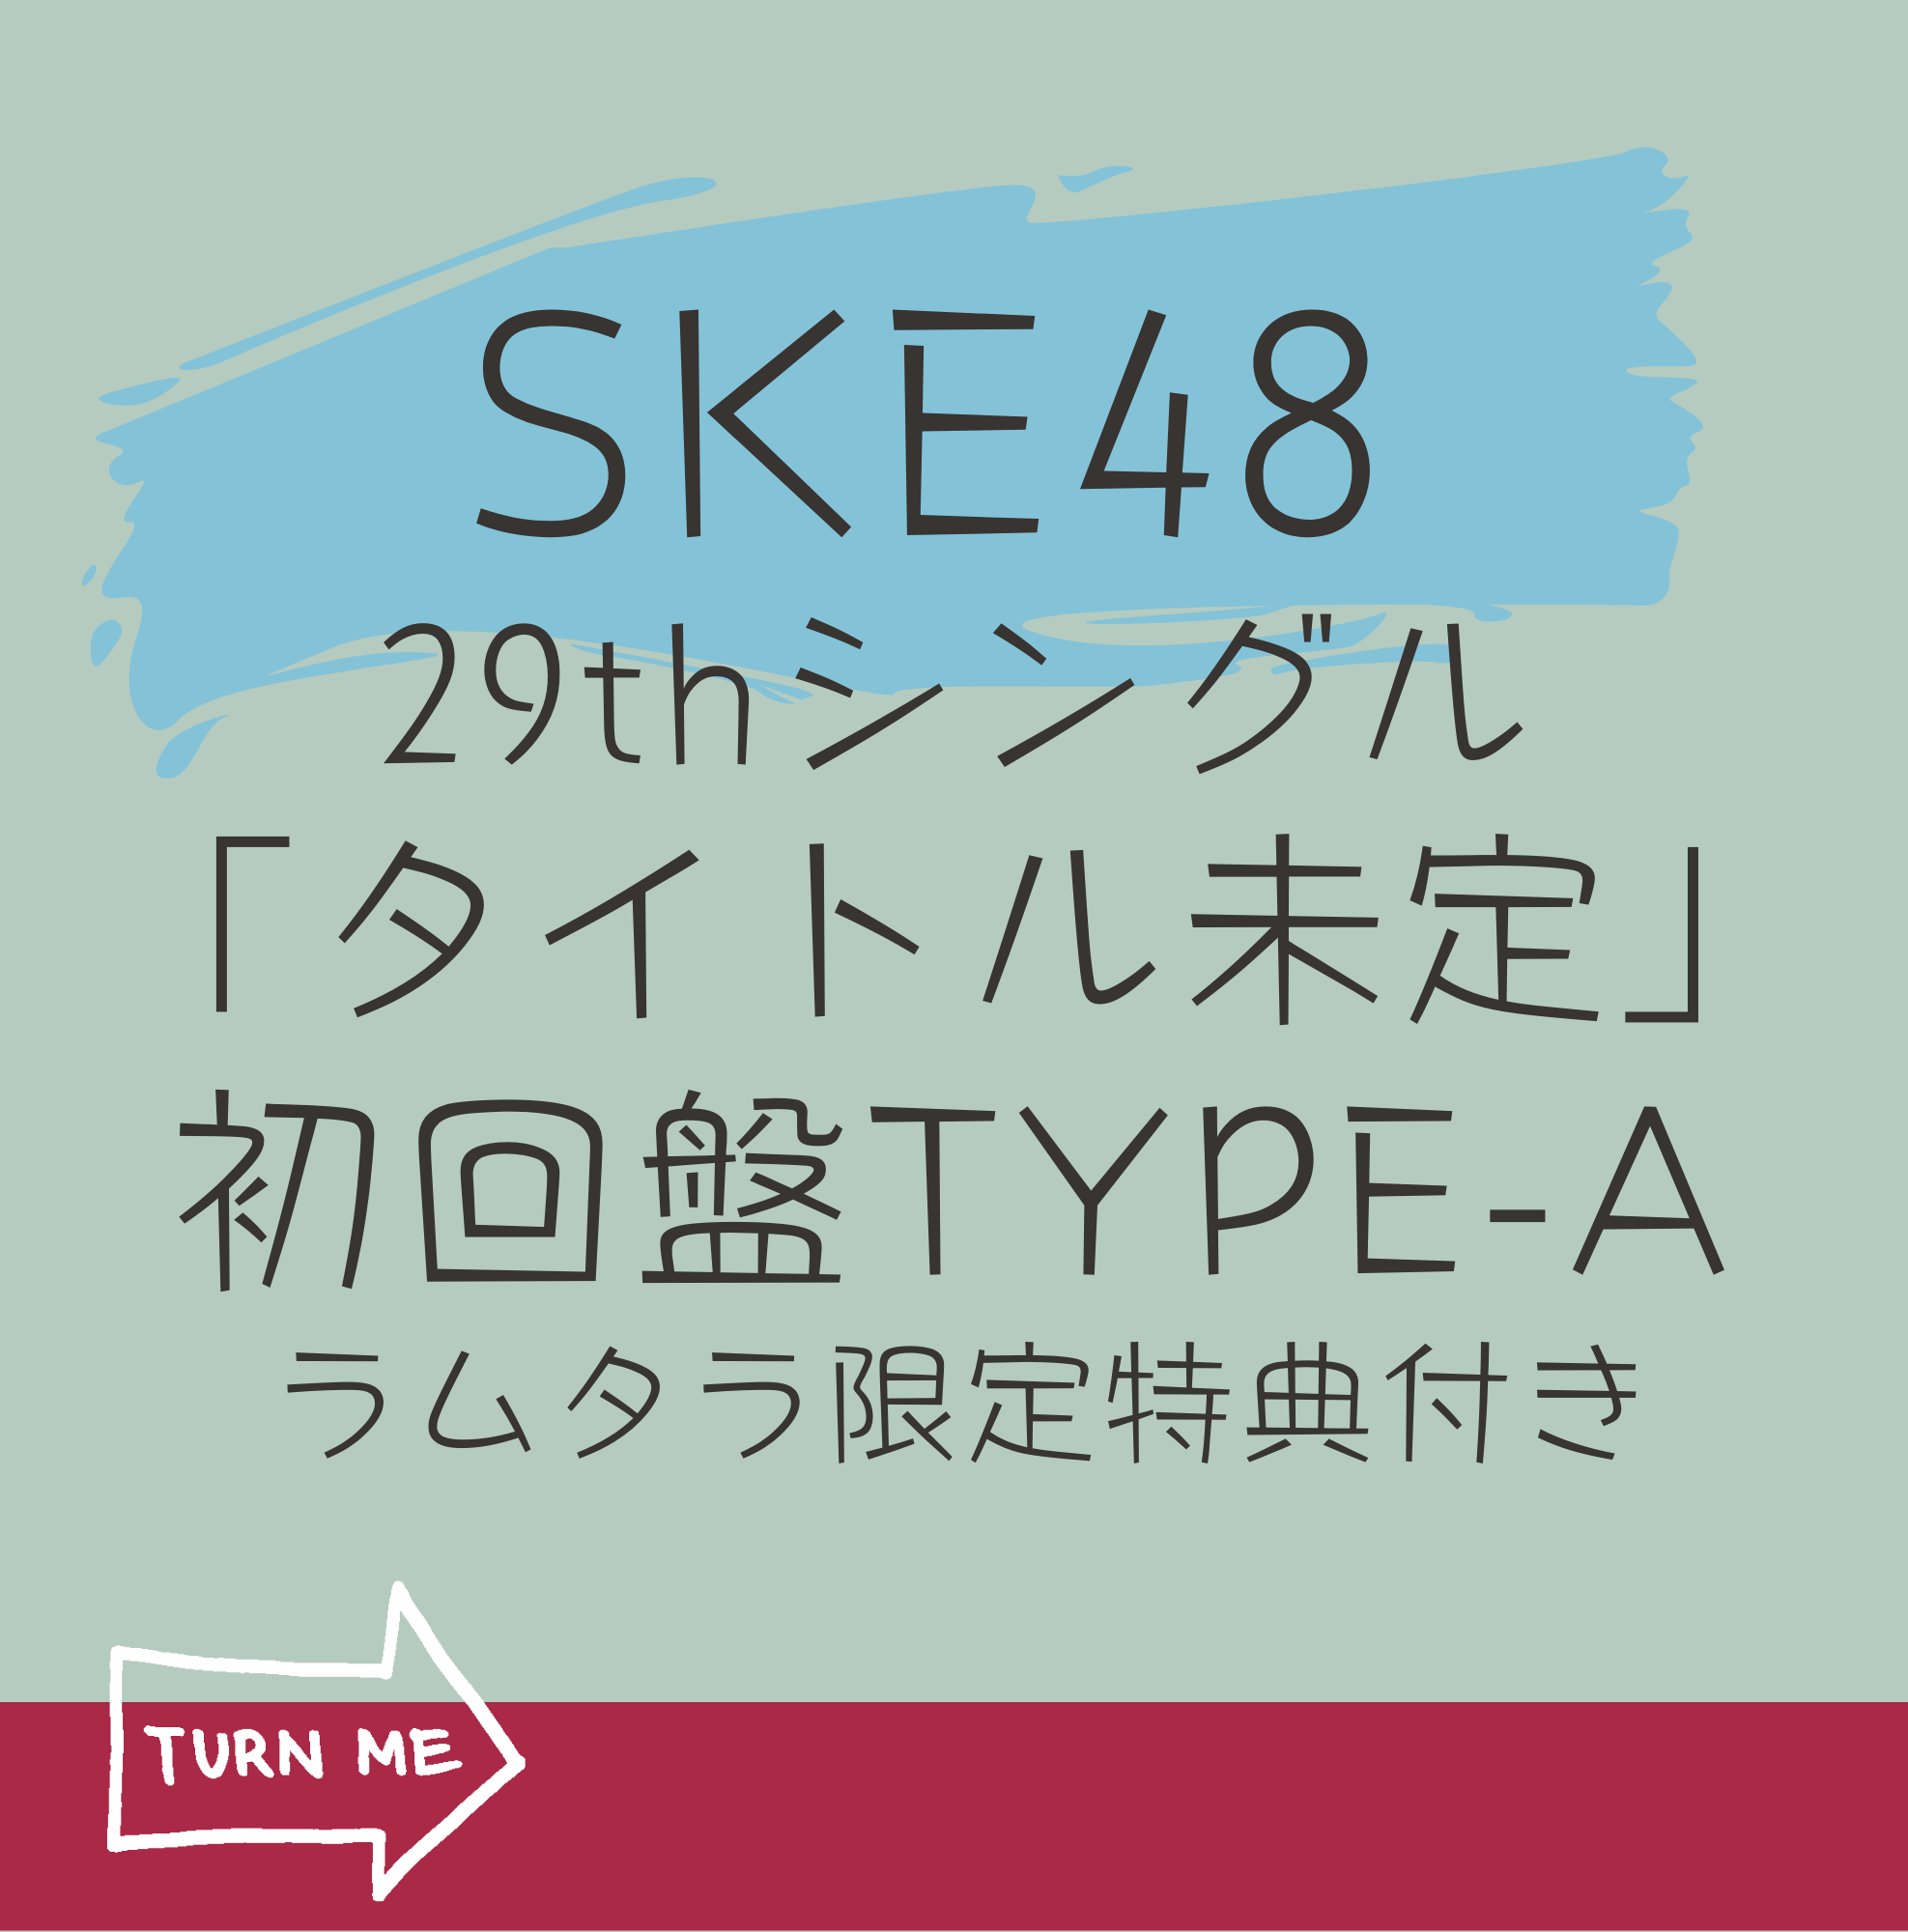 <strong style="font-size:12px;color:red;"><font color="red">予約受付中!</font></strong> SKE48  29thシングル「タイトル未定」(CD+DVD)【初回限定盤 TYPE-A】 ラムタラ限定特典付き